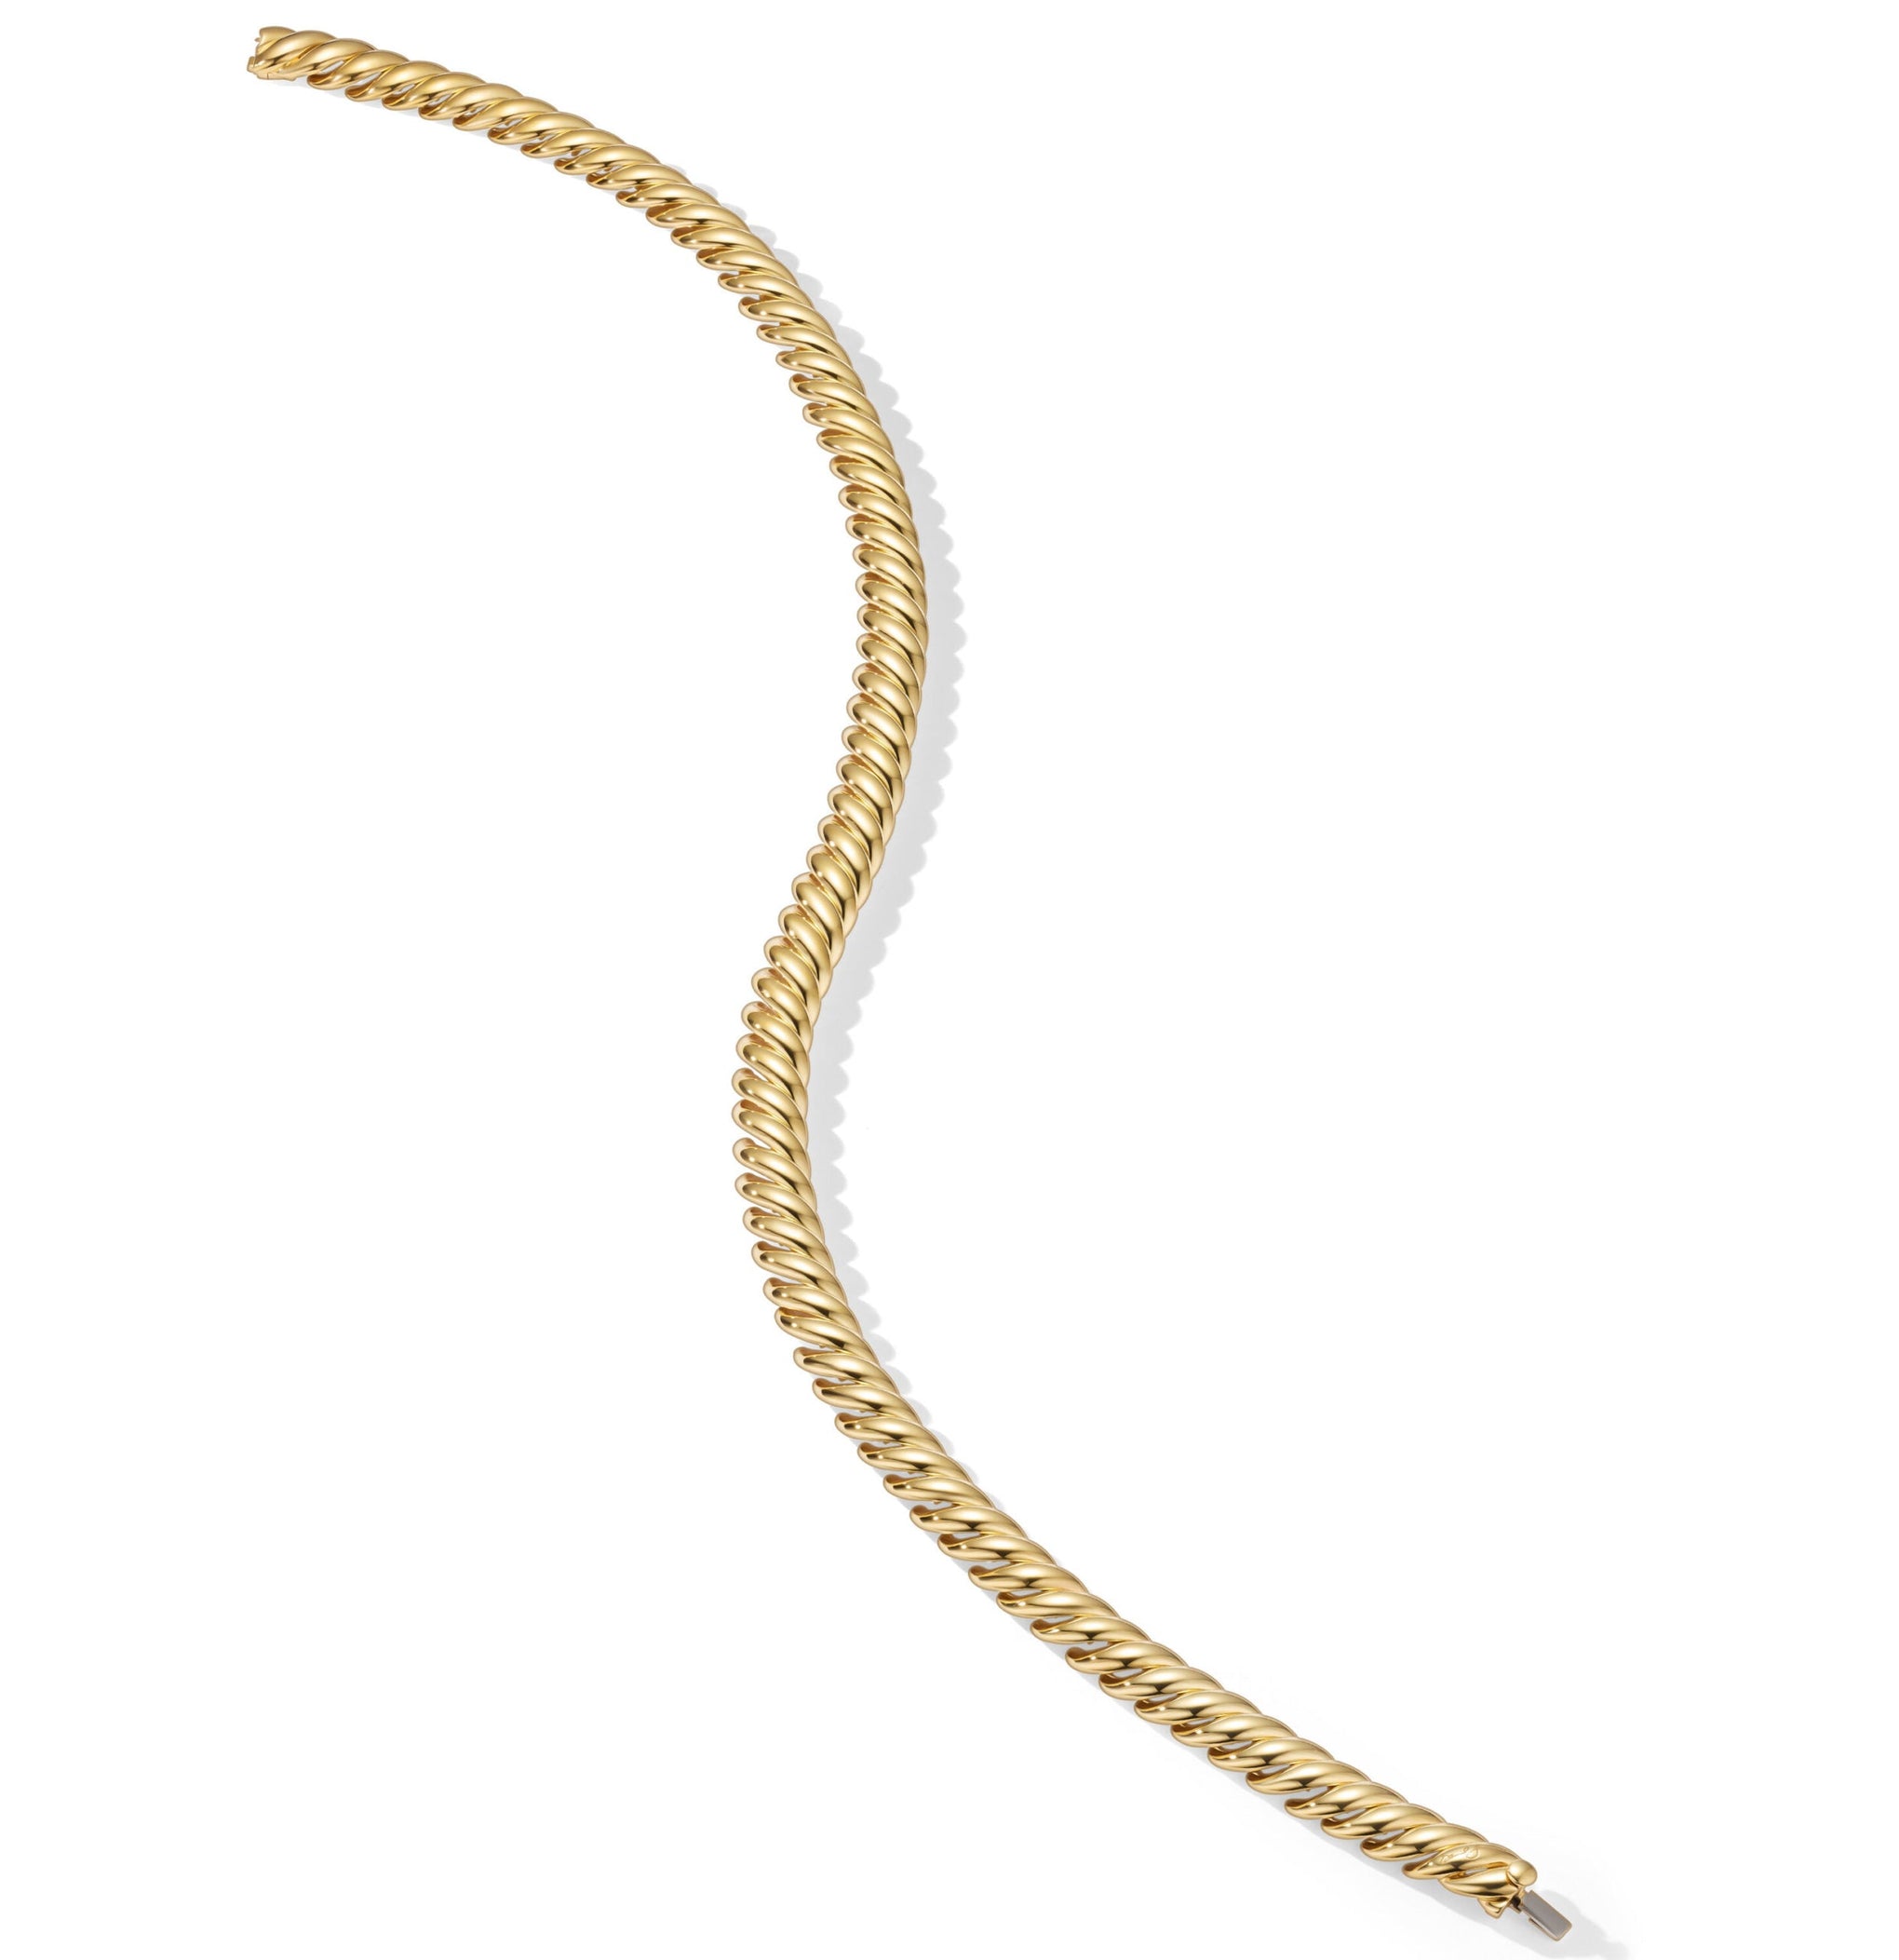 Sculpted Cable Double Wrap Bracelet in 18ct Yellow Gold